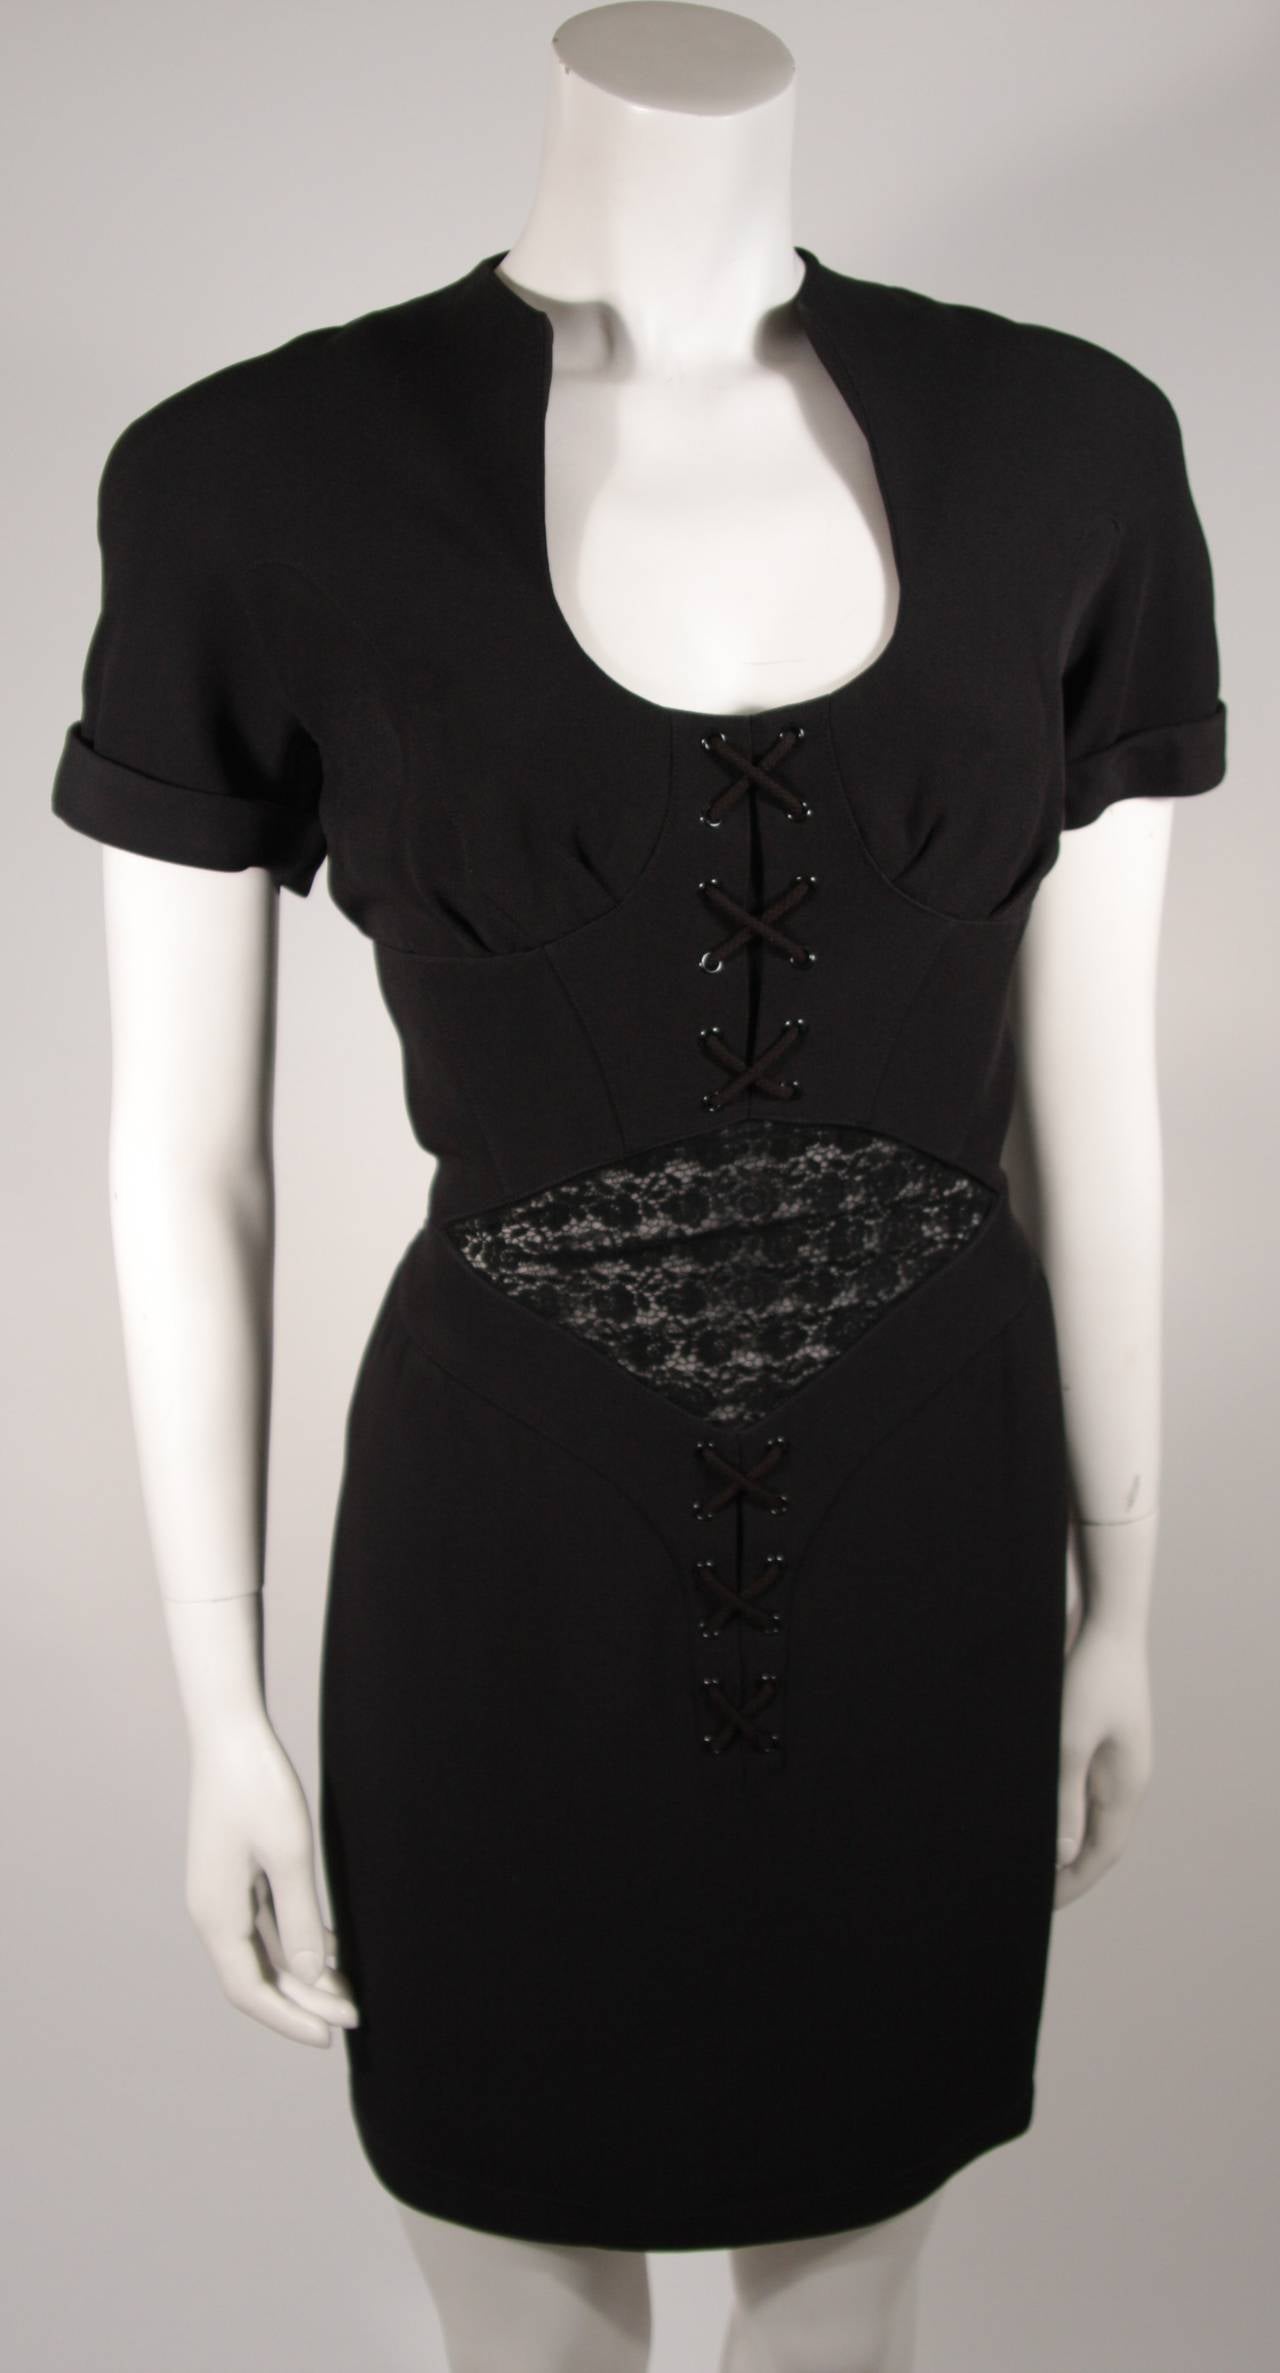 Women's Theirry Mugler Black Cocktail Dress with Corset and Lace Details Size 40